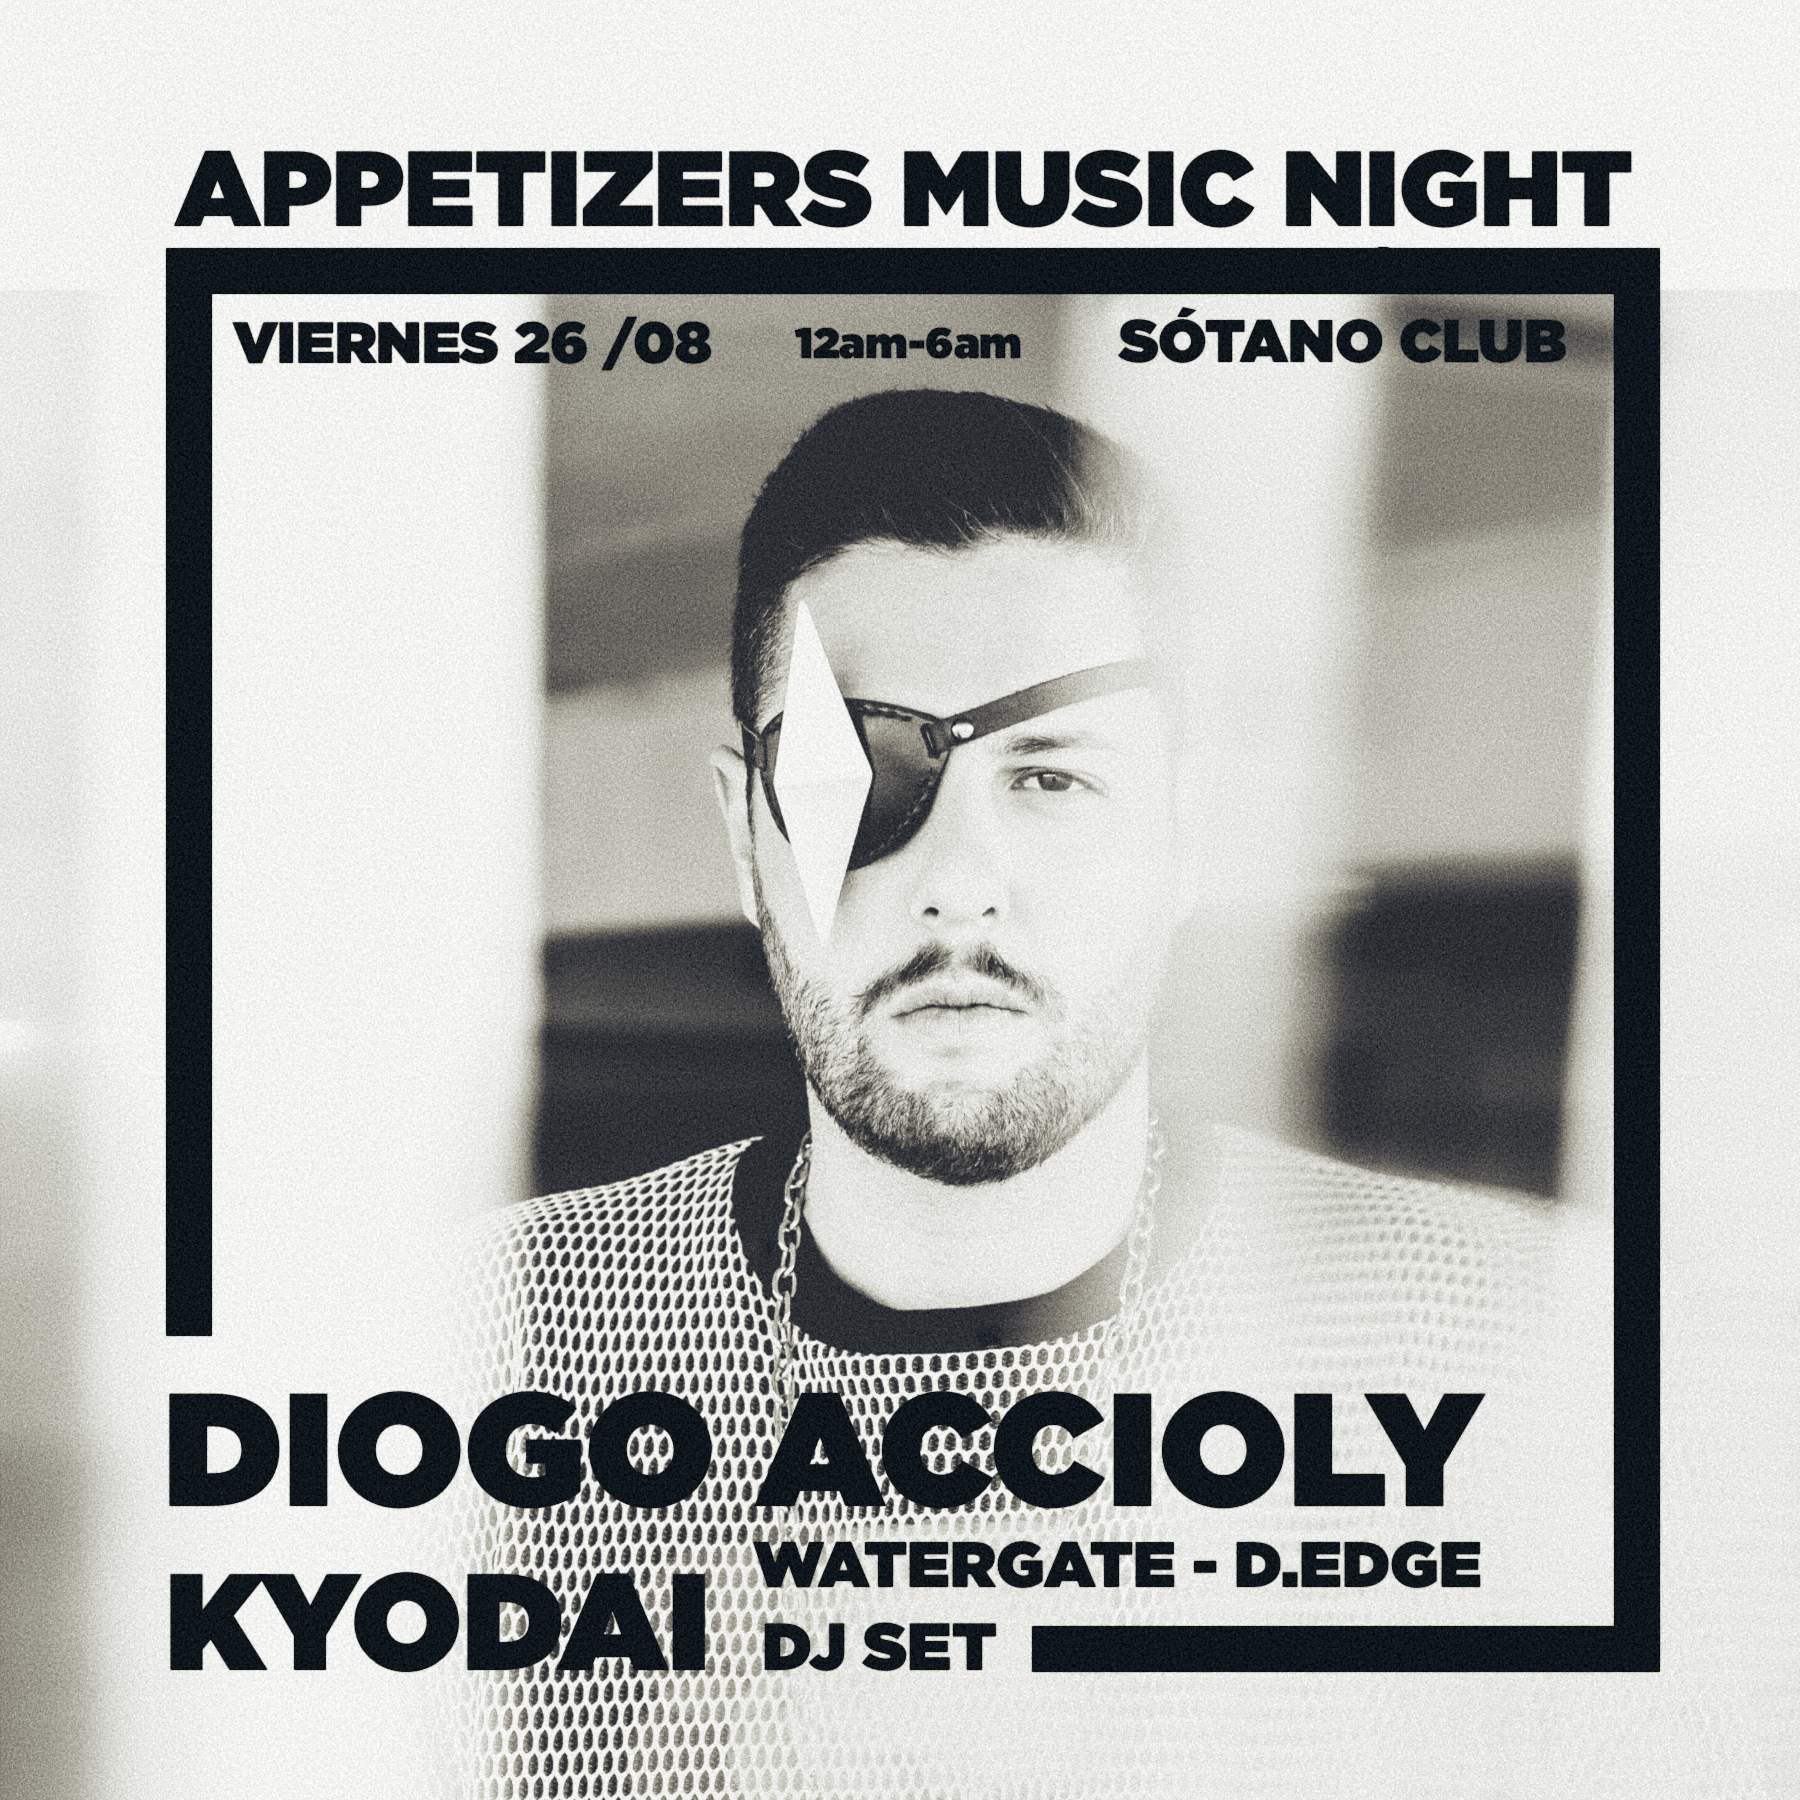 APPETIZERS MUSIC NIGHT (Diogo Accioly, Kyodai) - フライヤー表